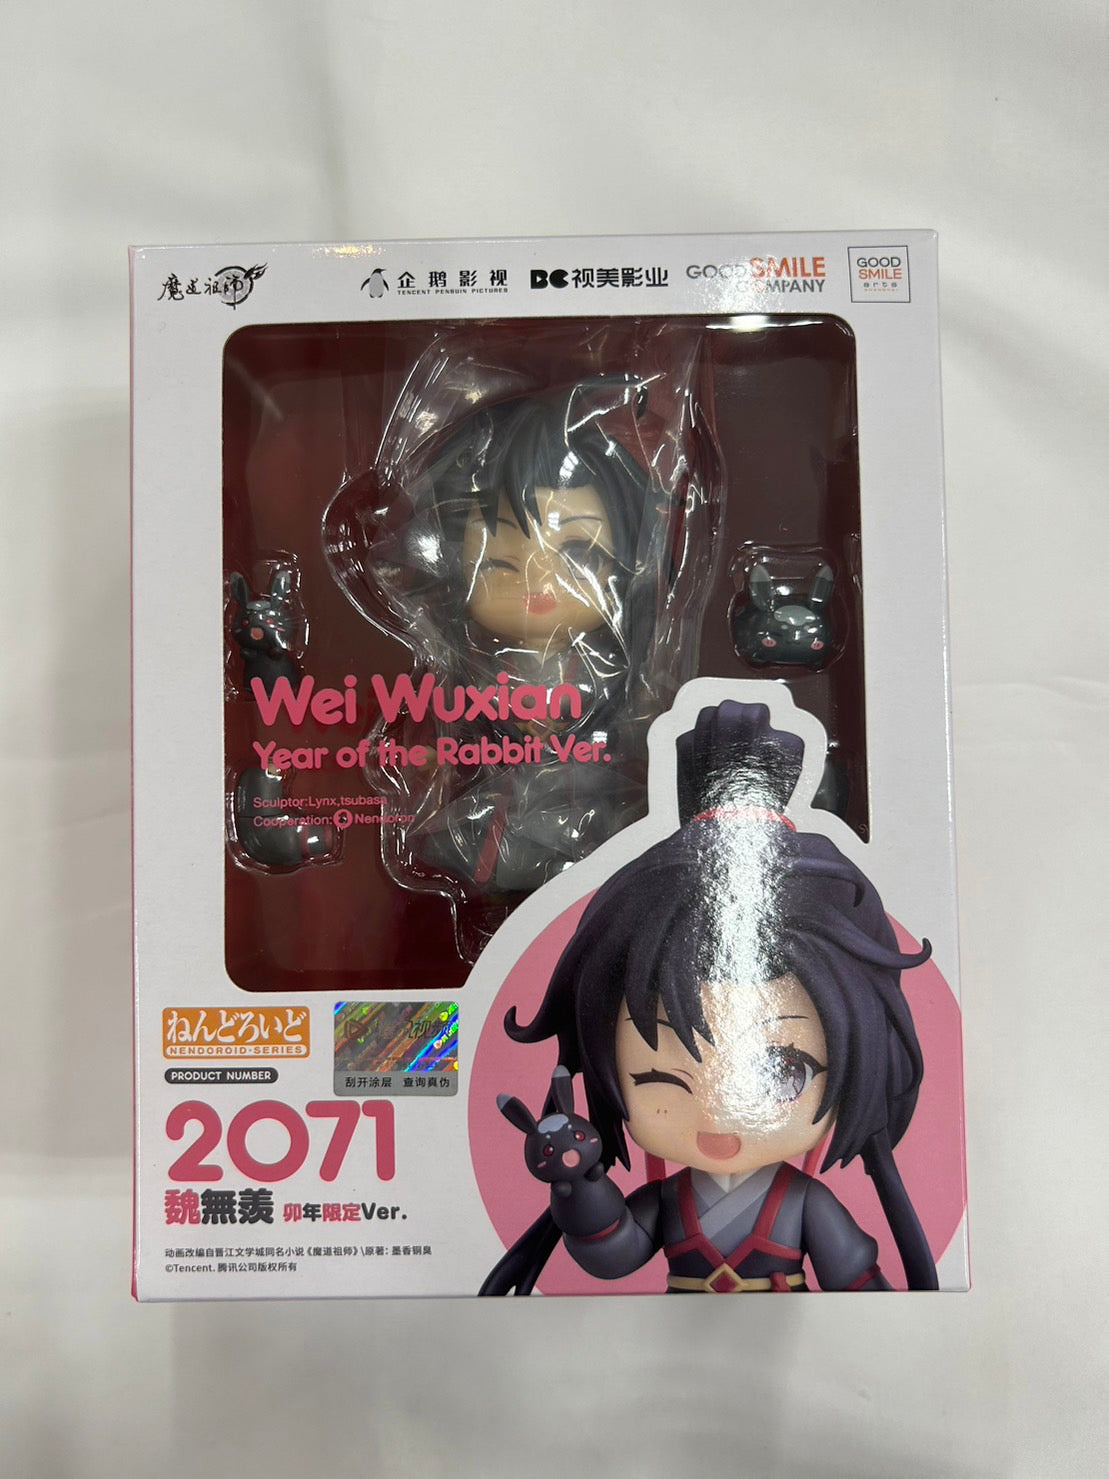 Nendoroid No.2071 Wei WuXian Year of the Rabbit Limited Ver